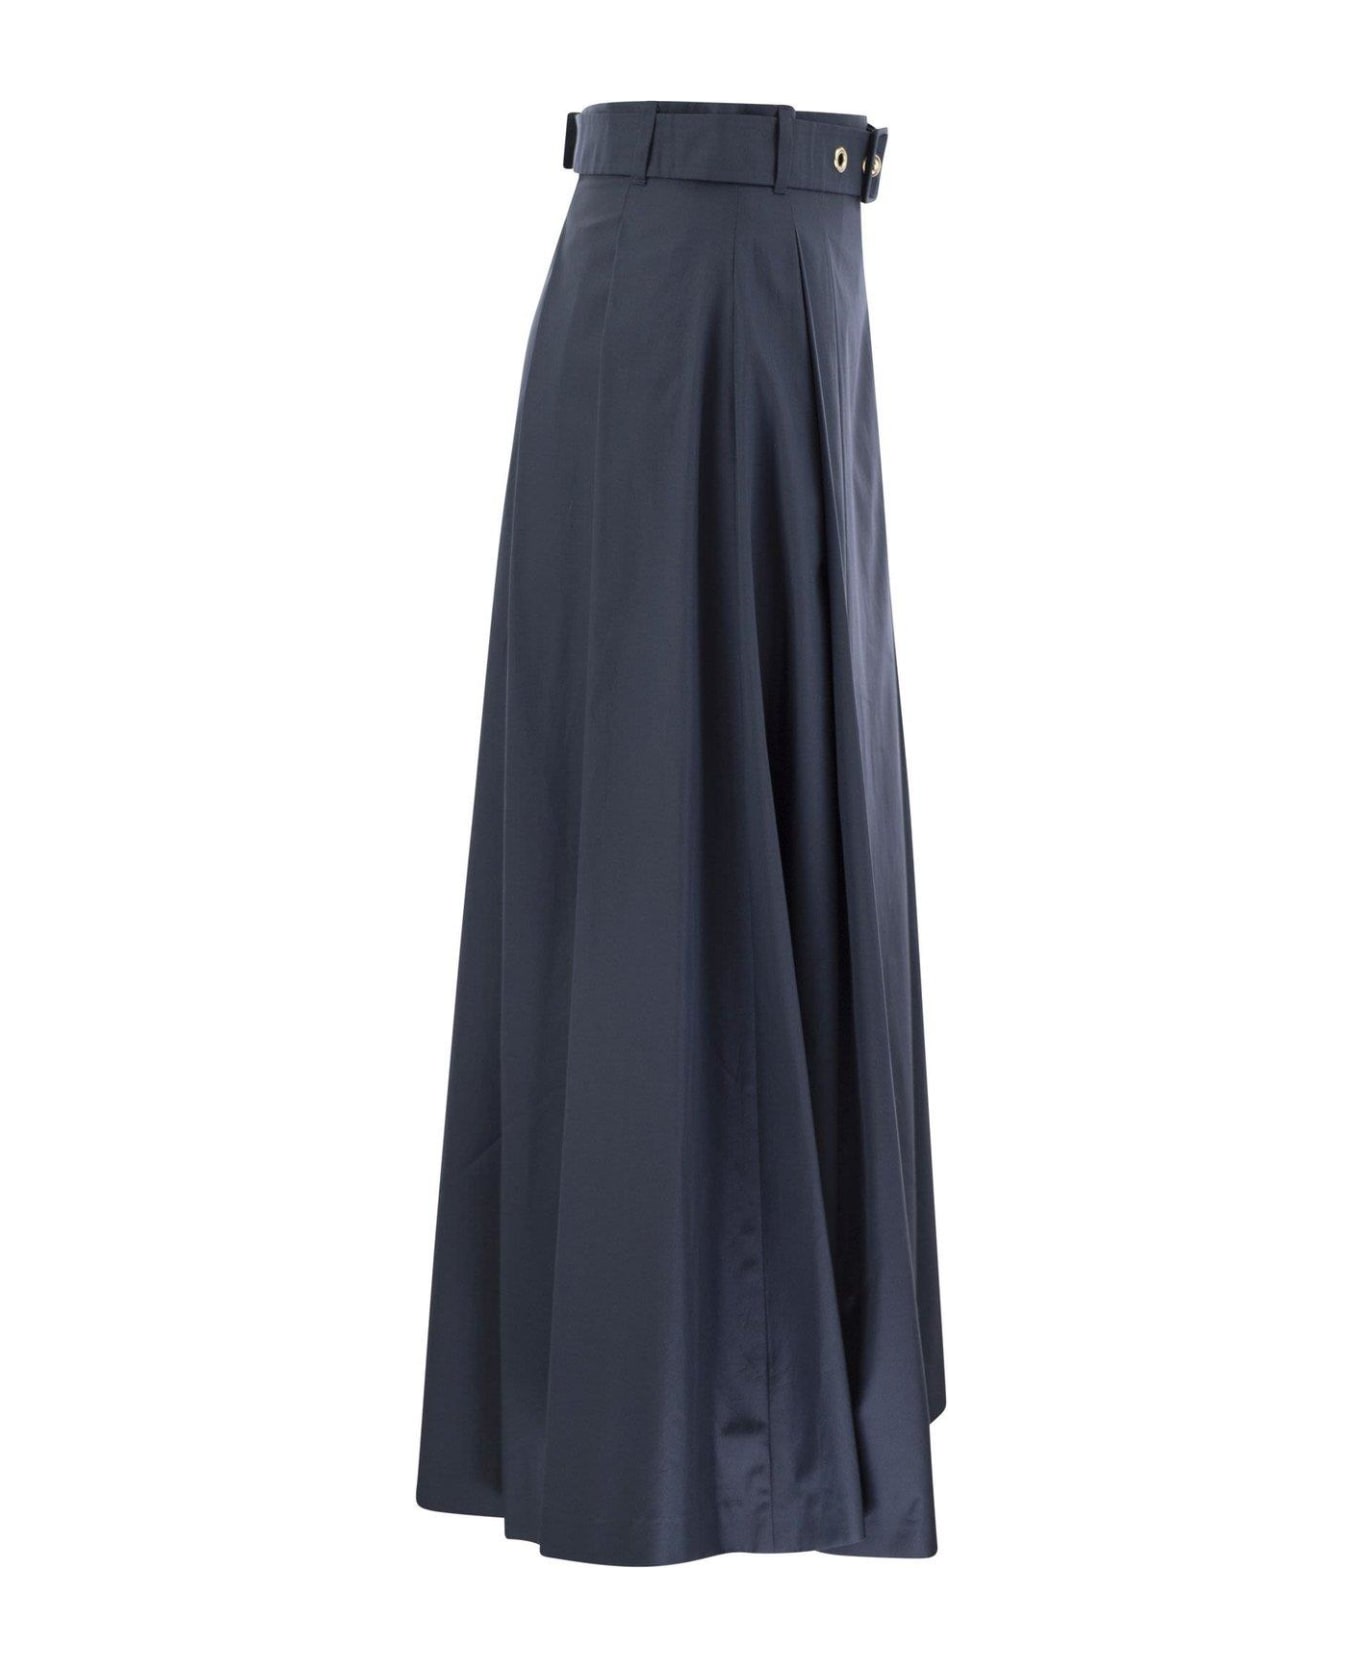 'S Max Mara Belted Pleated Skirt - Blue スカート